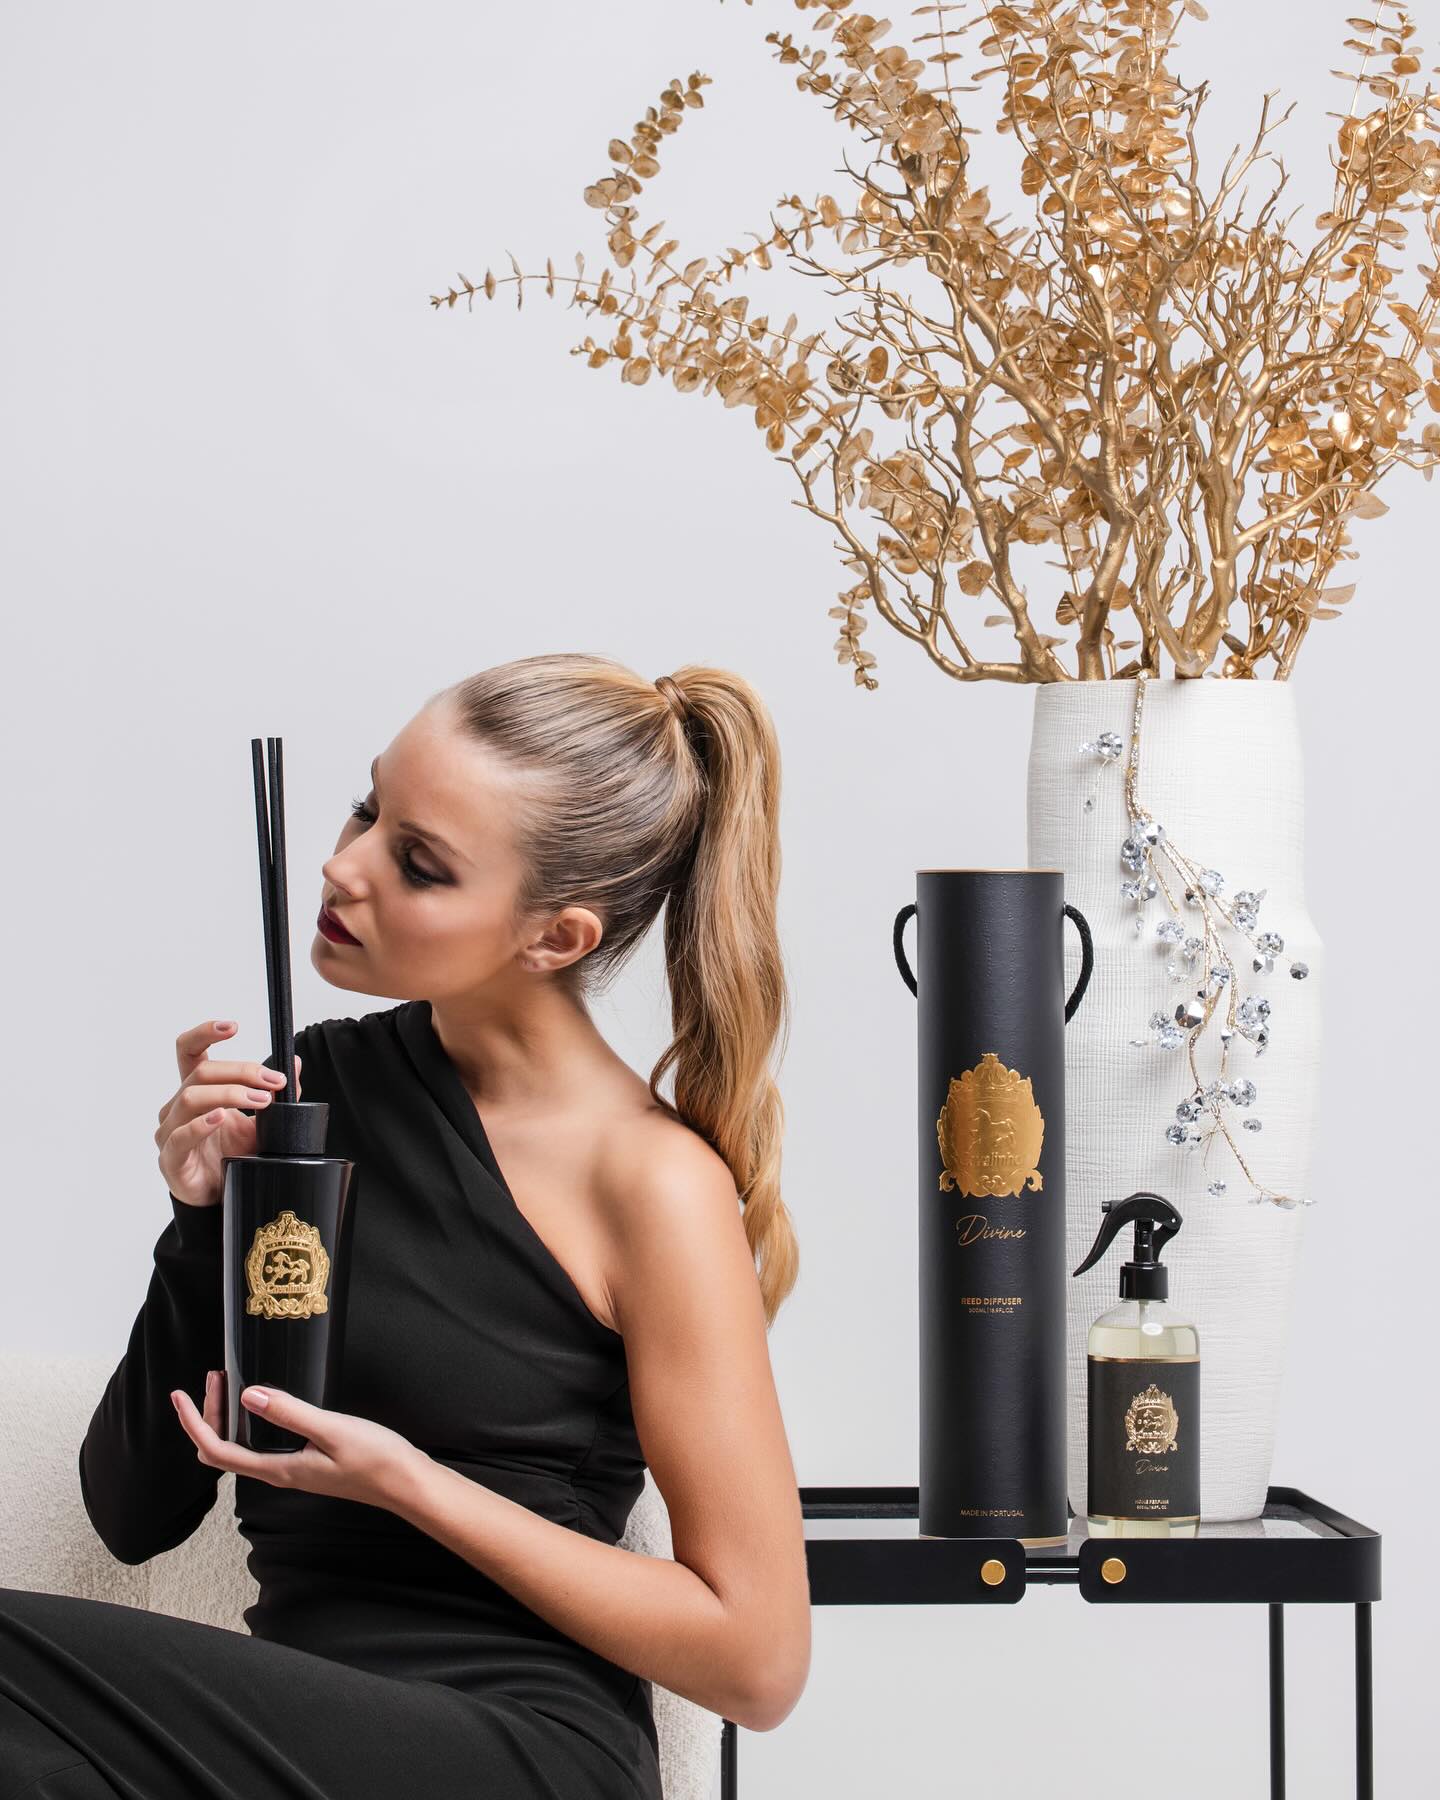 NEW Luxury home scents, fragrance and diffusers 